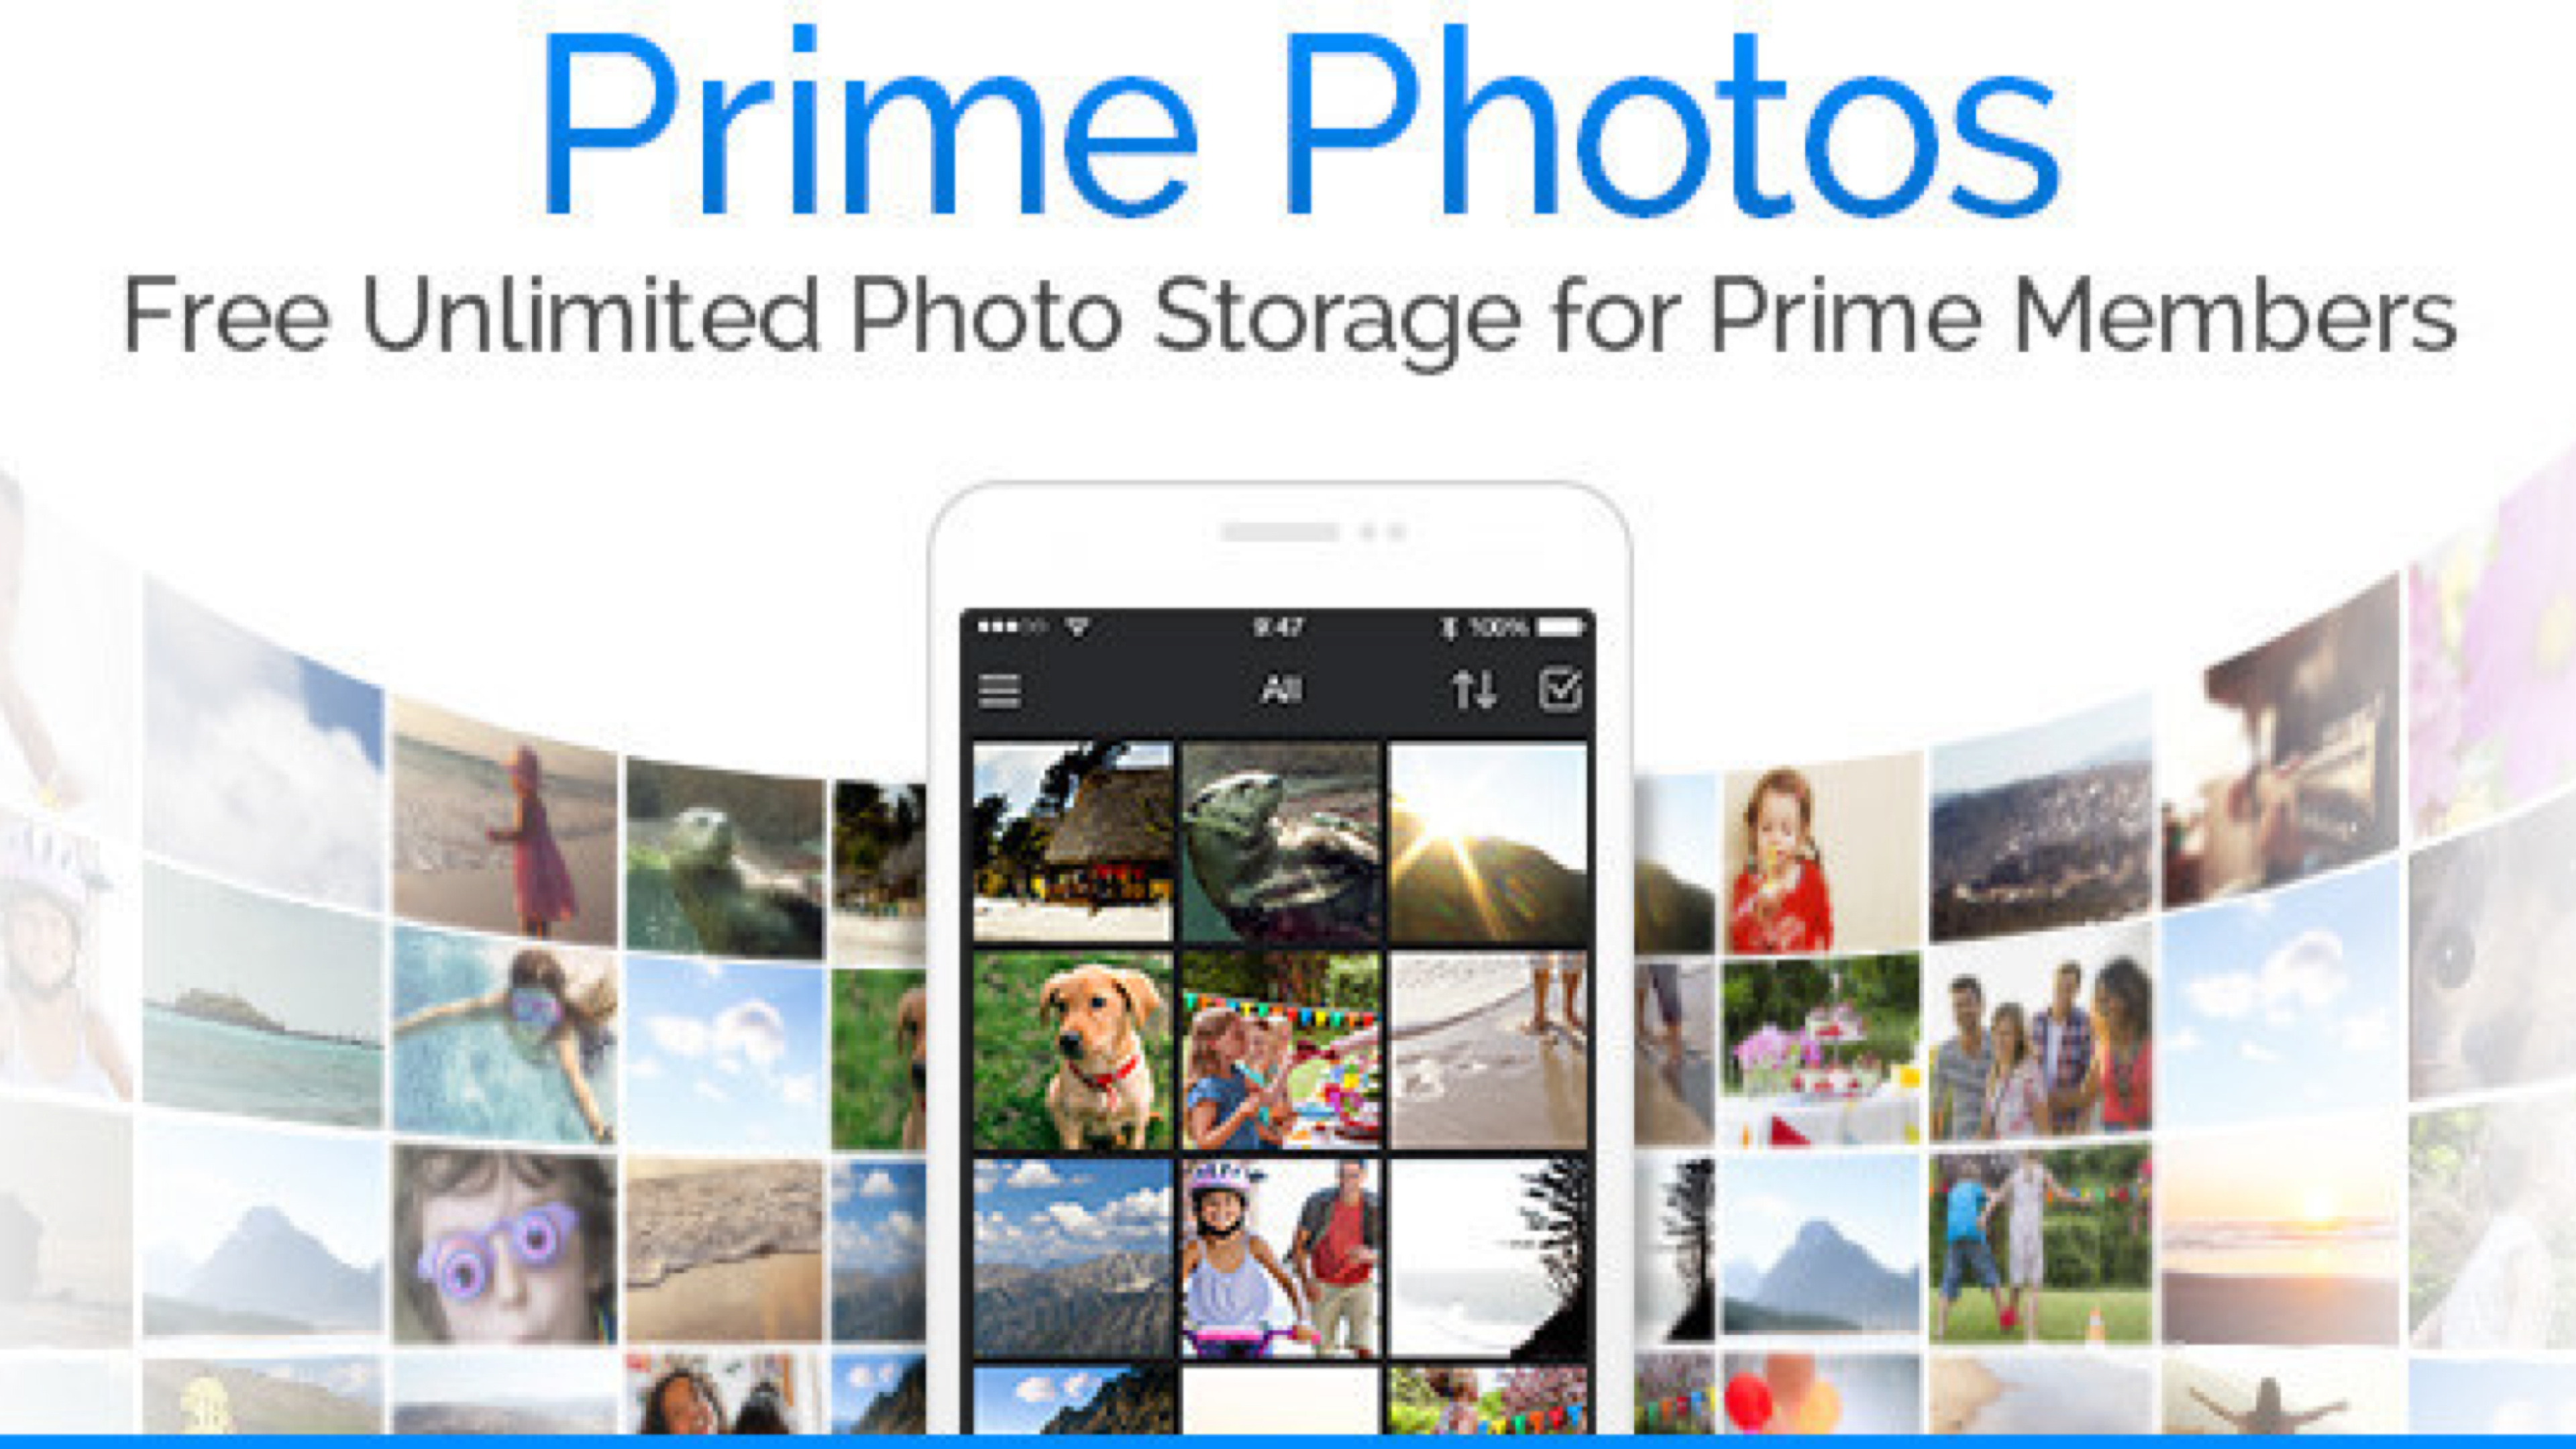 amazon prime photos storage app available for those with a prime membership